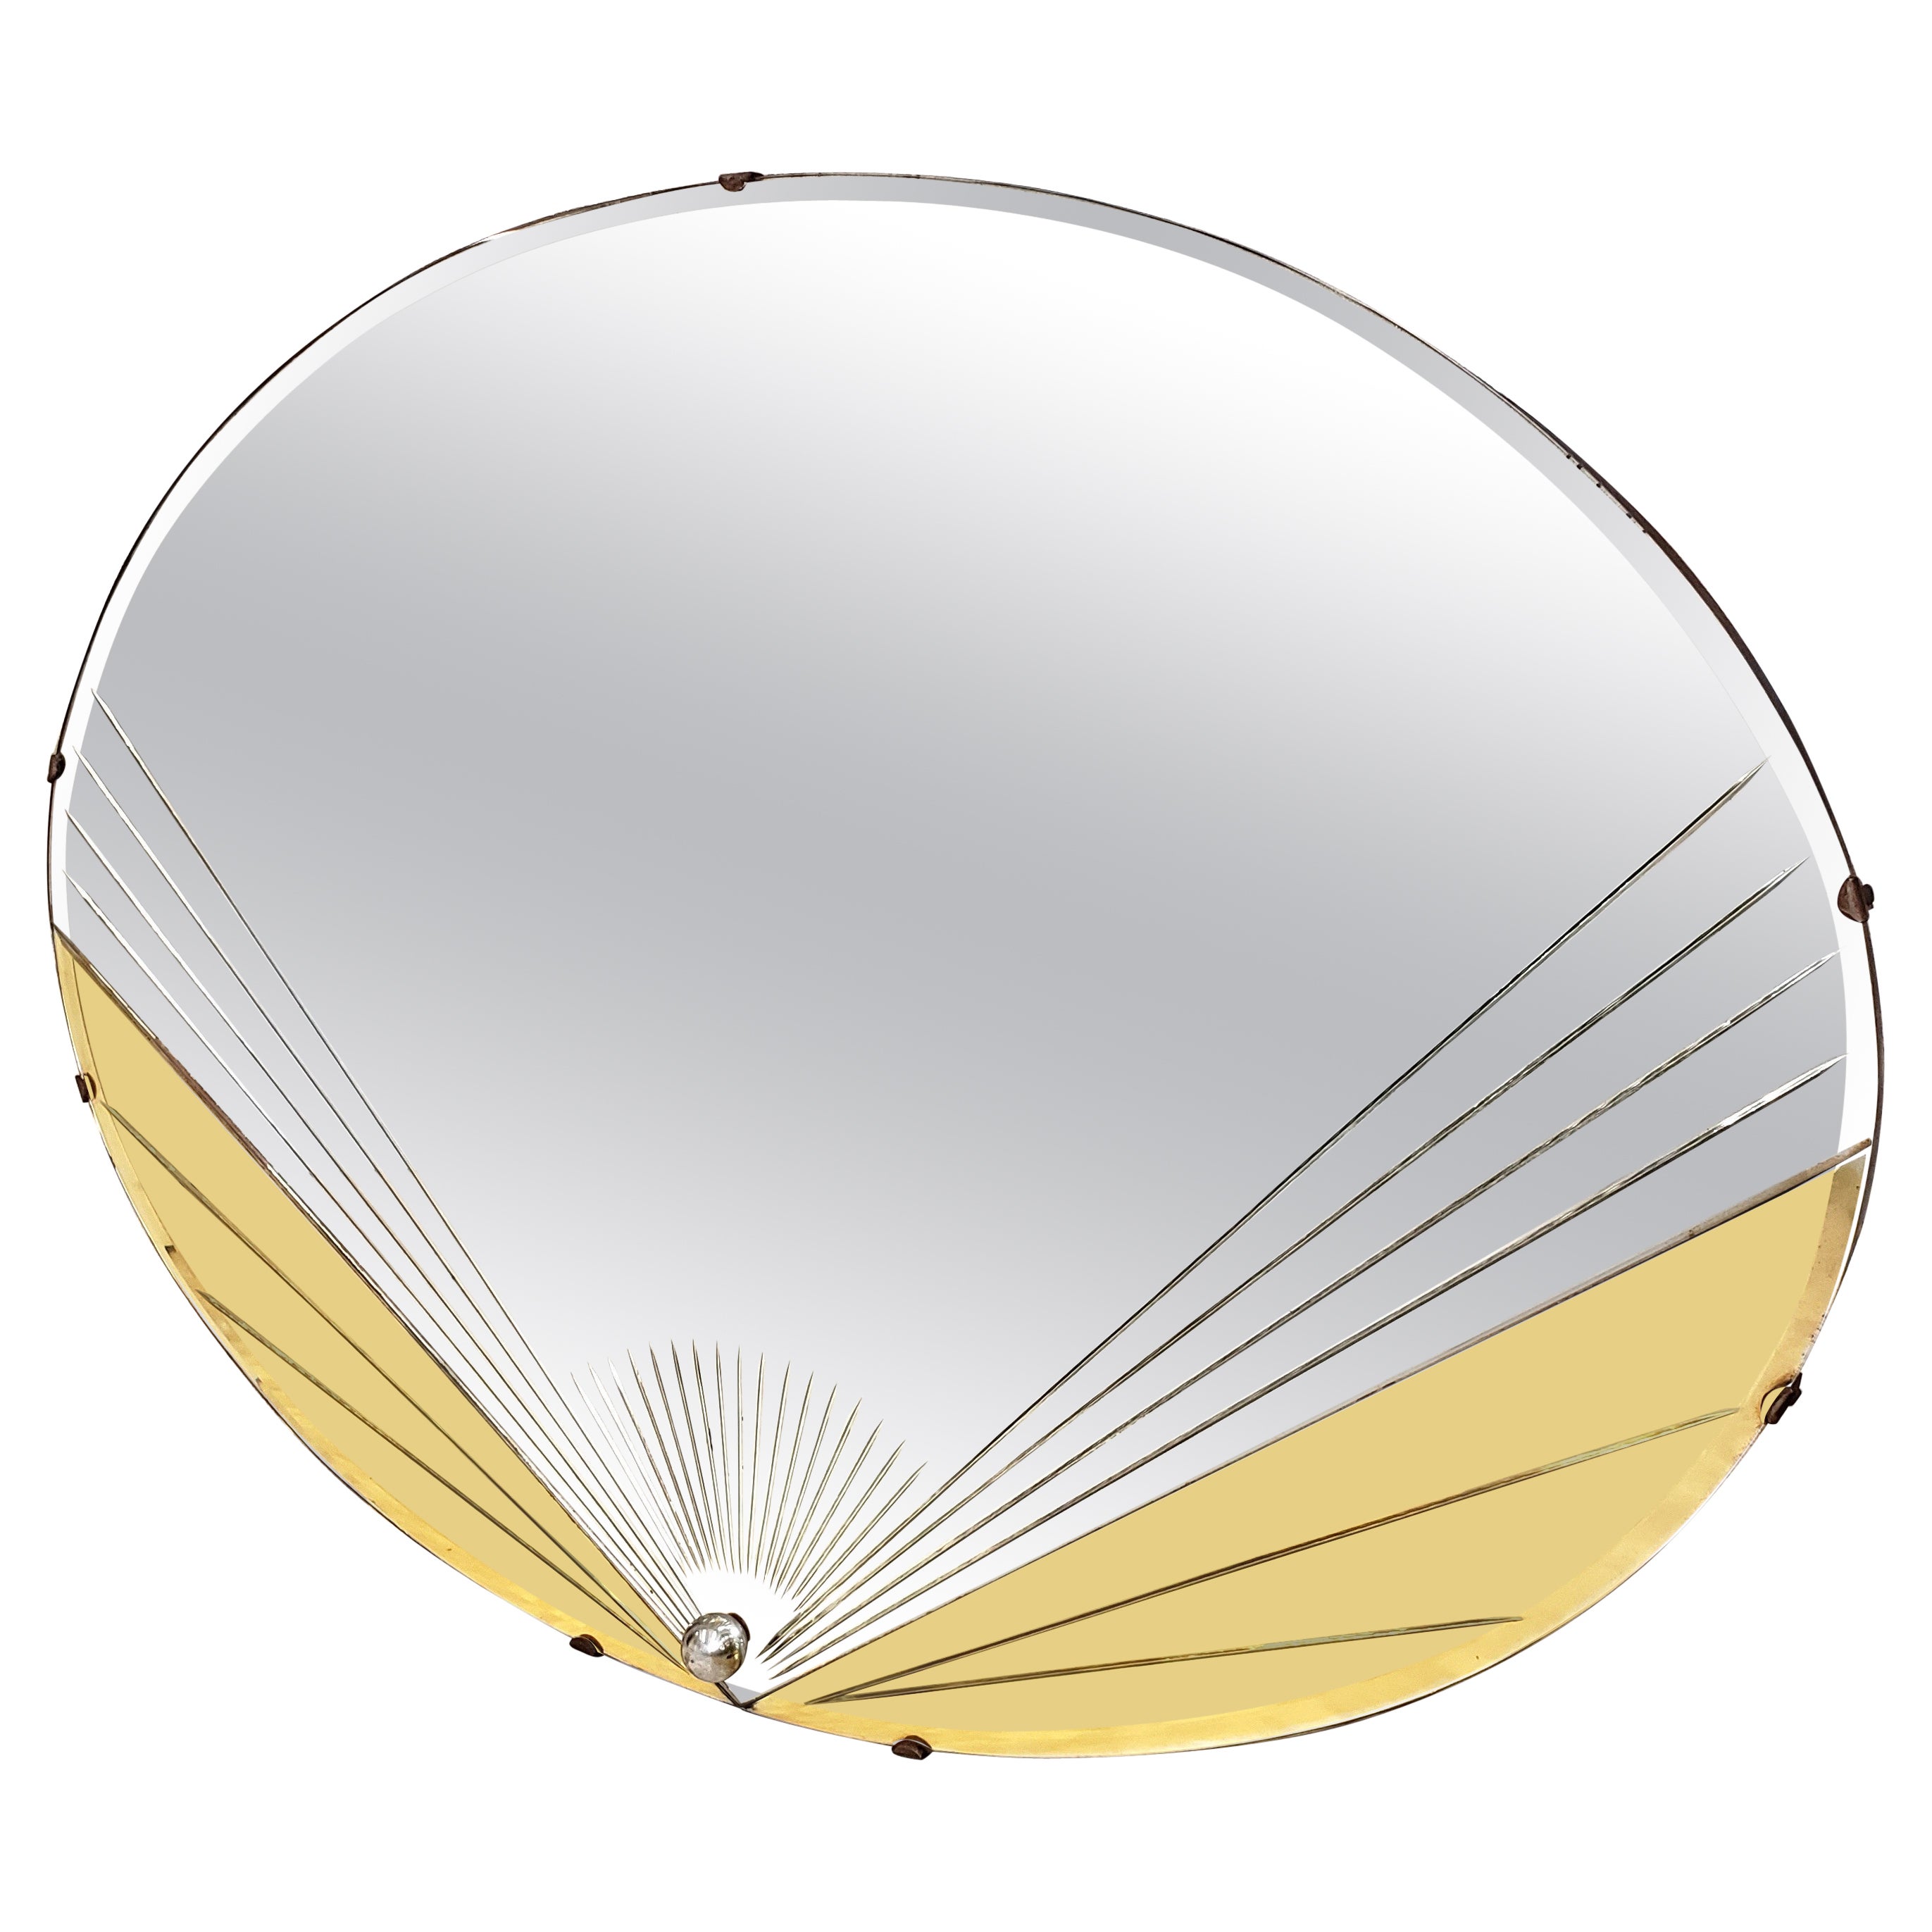 Hobbs Art Deco Mirror with Rose Gold Colored Glass